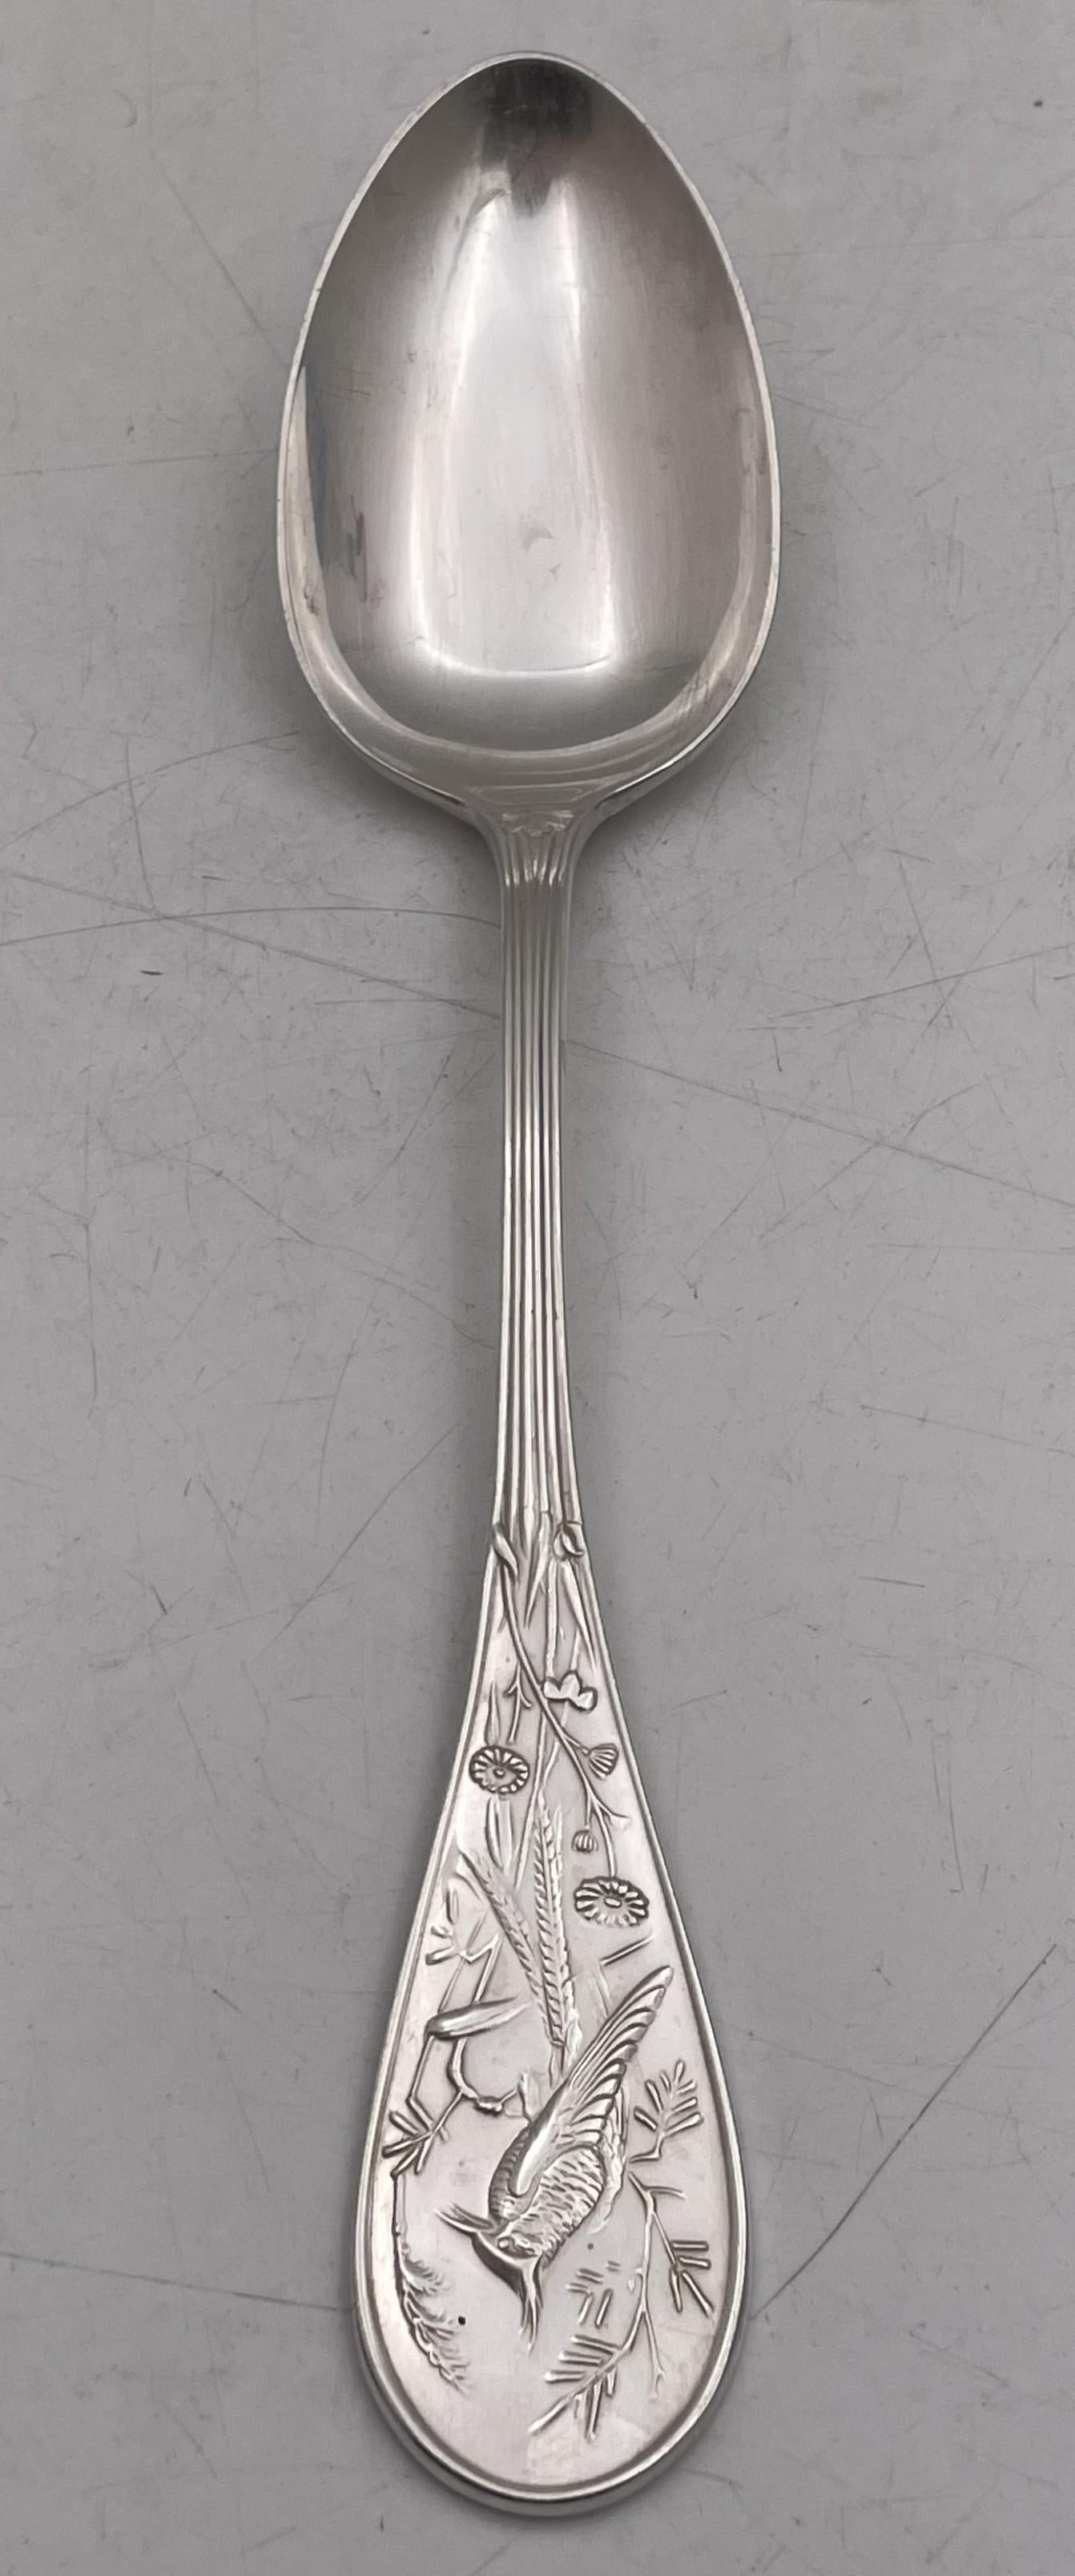 Tiffany & Co. sterling silver tablespoon in the celebrated Audubon pattern, beautifully adorned with a bird and natural motifs, measuring 8 1/2'' in length, and bearing hallmarks as shown.

The legendary Tiffany brand was founded in 1837 by Charles